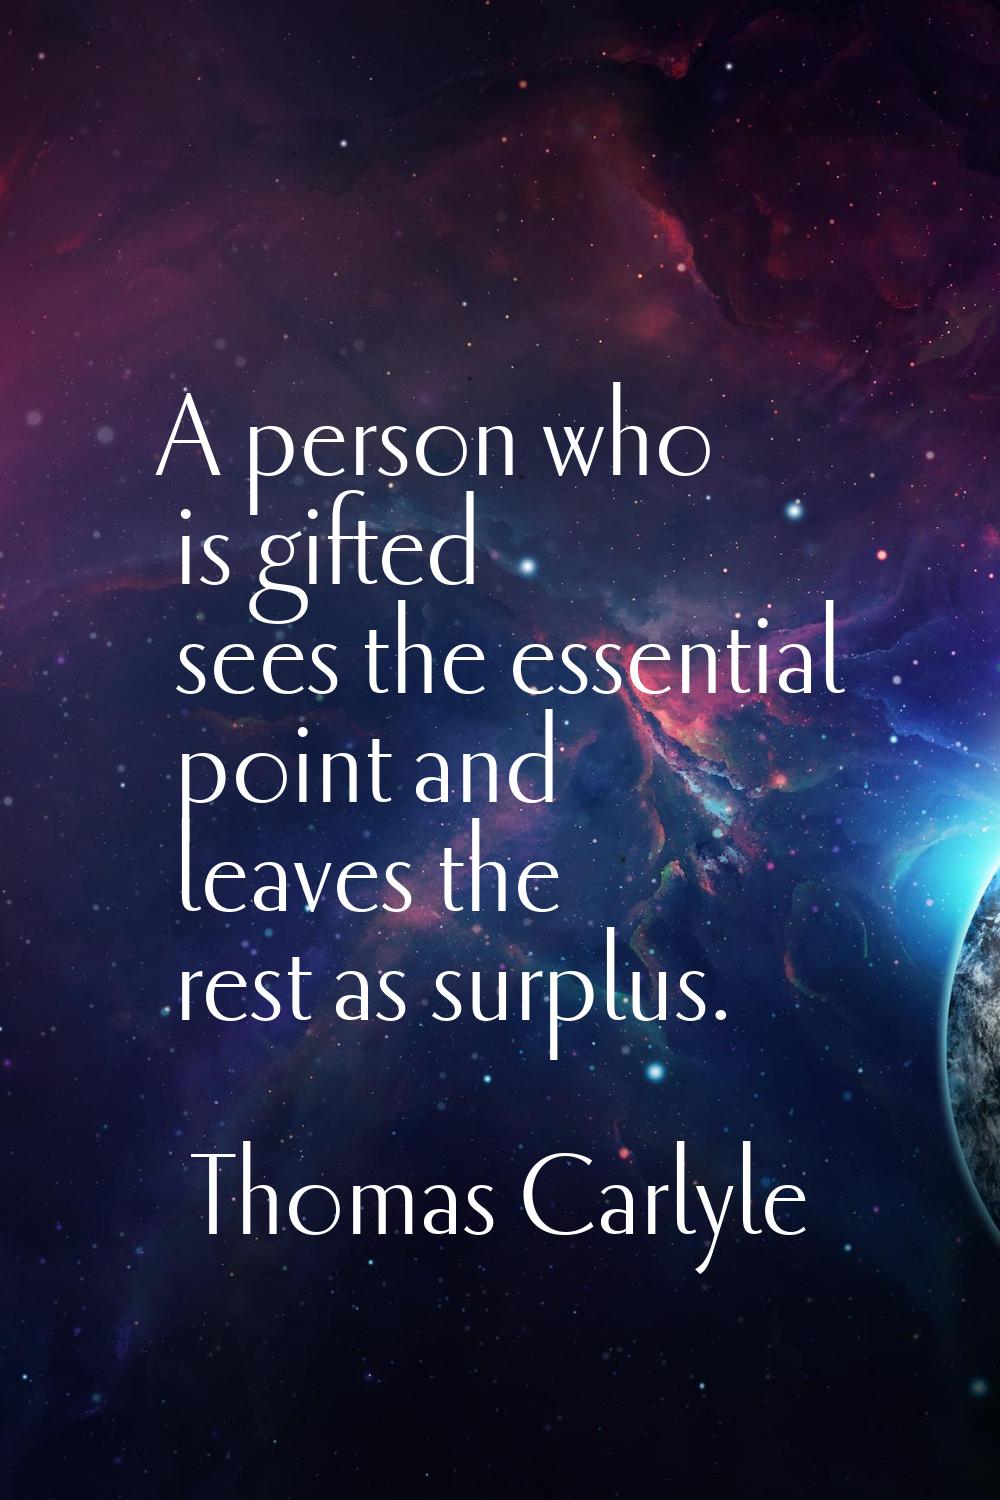 A person who is gifted sees the essential point and leaves the rest as surplus.